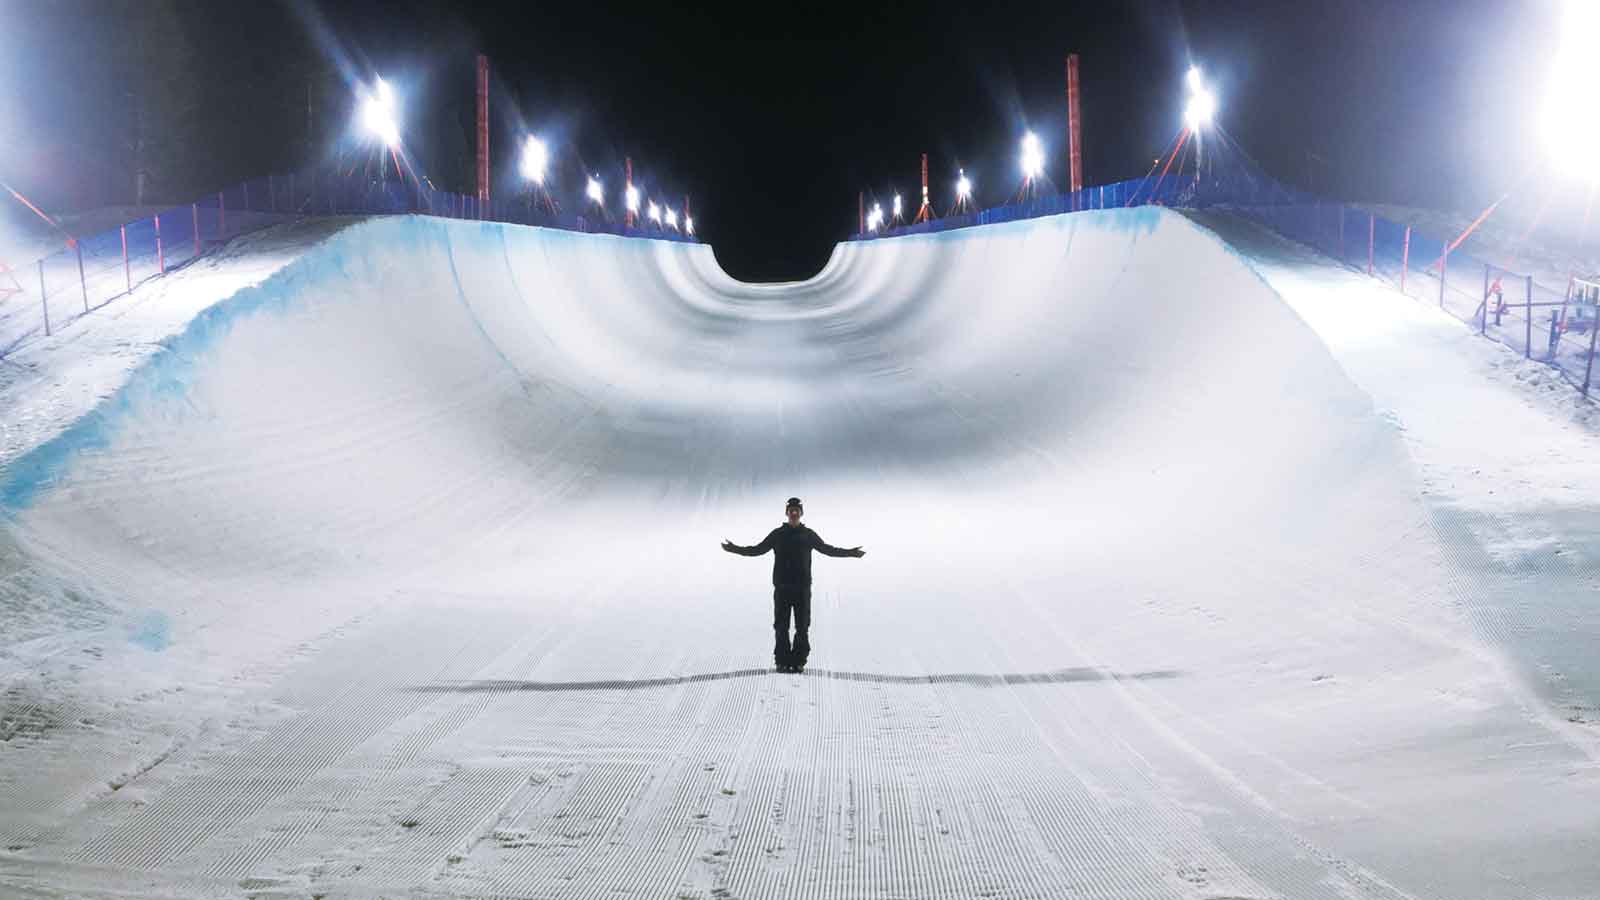  A spectator views the Mammoth Mountain Grand Prix Olympic Qualifier super-pipe all lit up and in its glory.